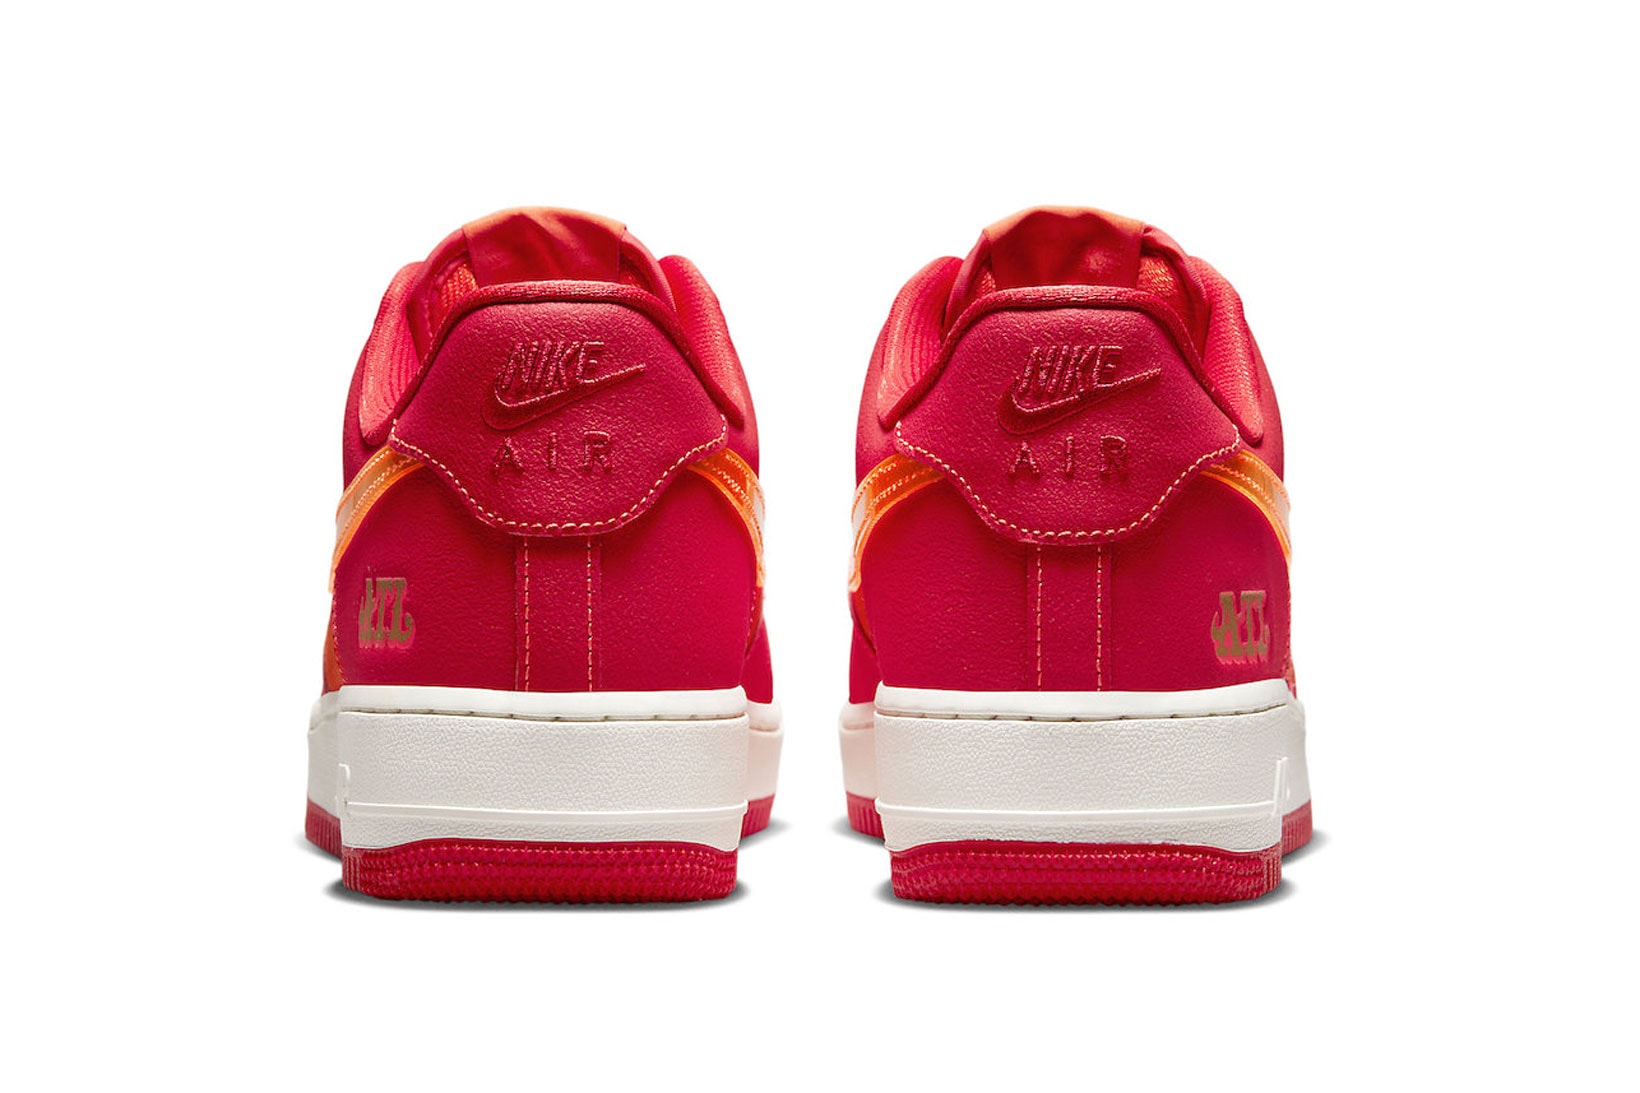 Nike Air Force 1 Low "ATLanta" Official Images Release Date Price Info